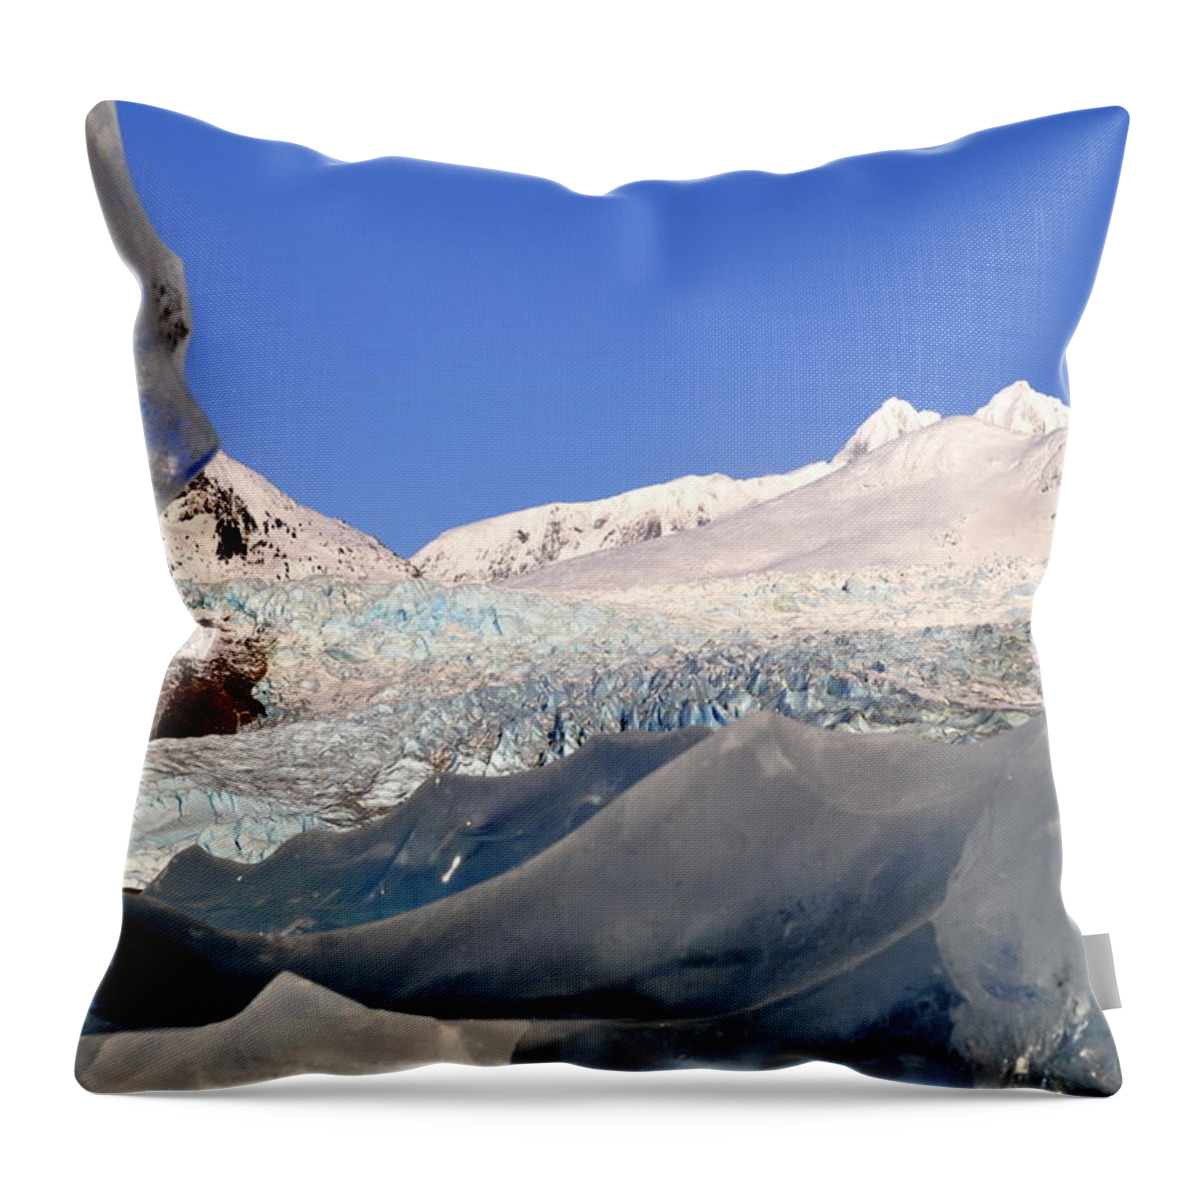 Landscape Throw Pillow featuring the photograph Mendenhall Glacier Refraction by Cathy Mahnke